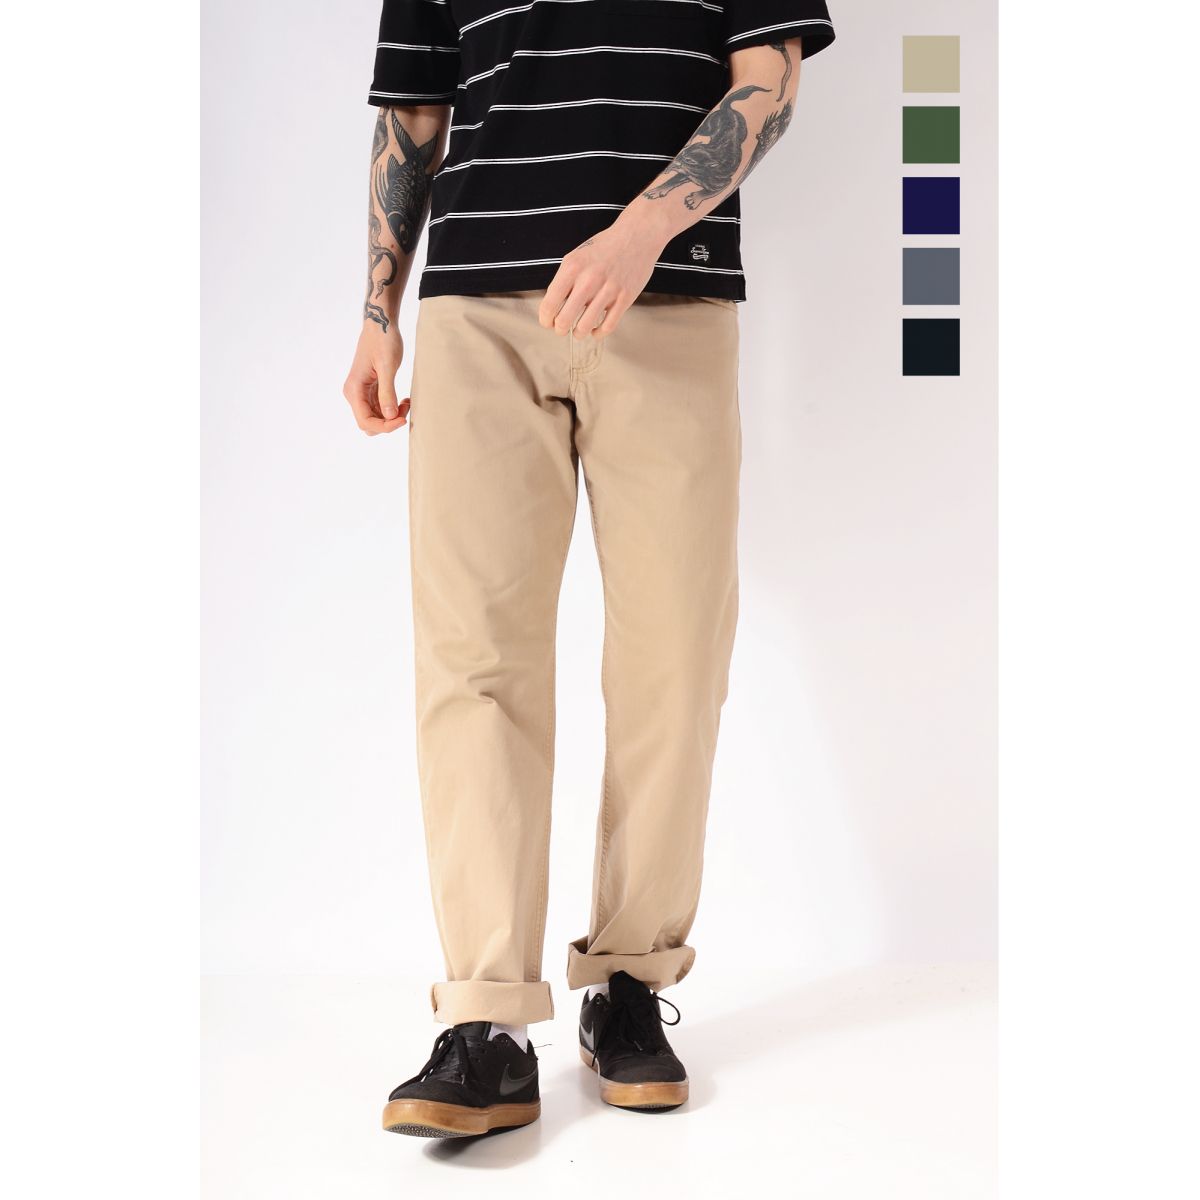 LEE Chino Coloured Trousers Straight Leg Various Sizes